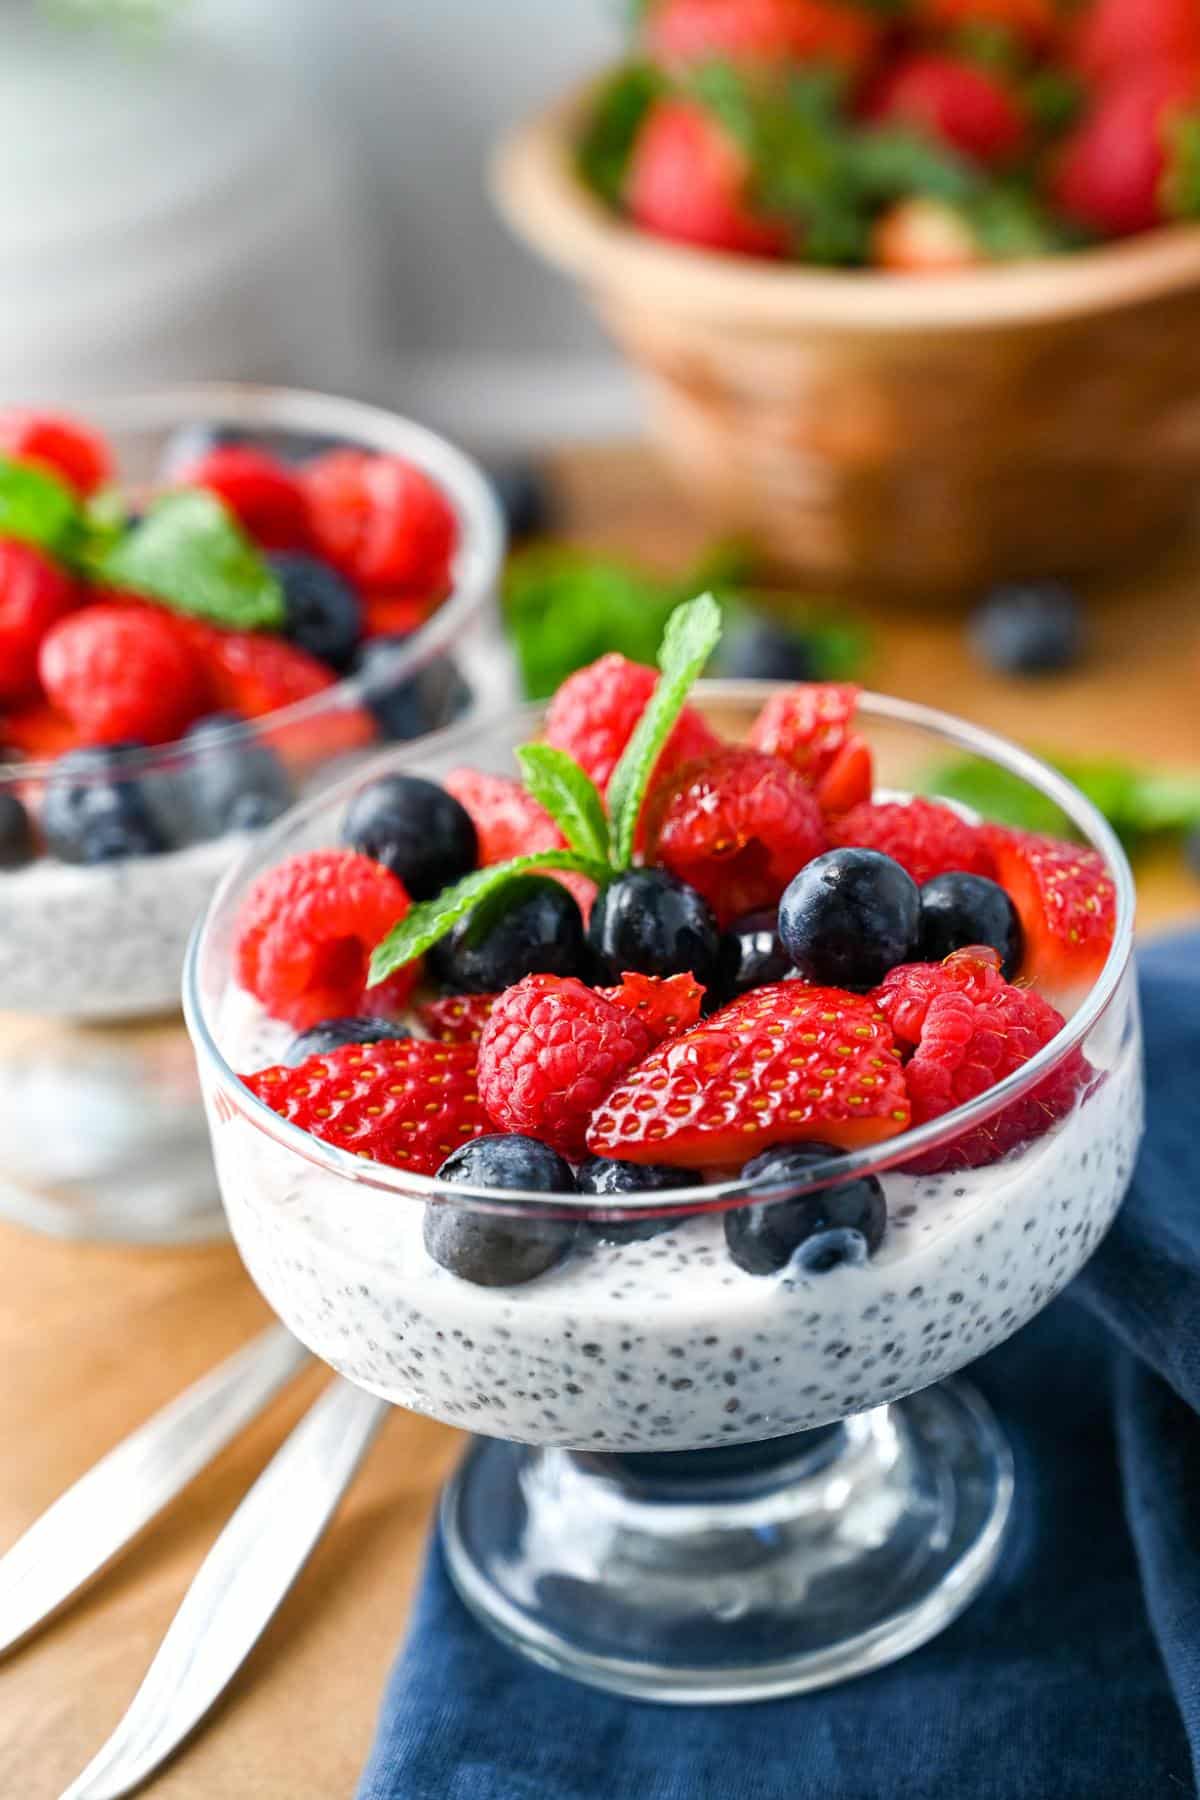 two chia puddings made with yogurt and milk with fresh berries on top and a bowl of berries behind them